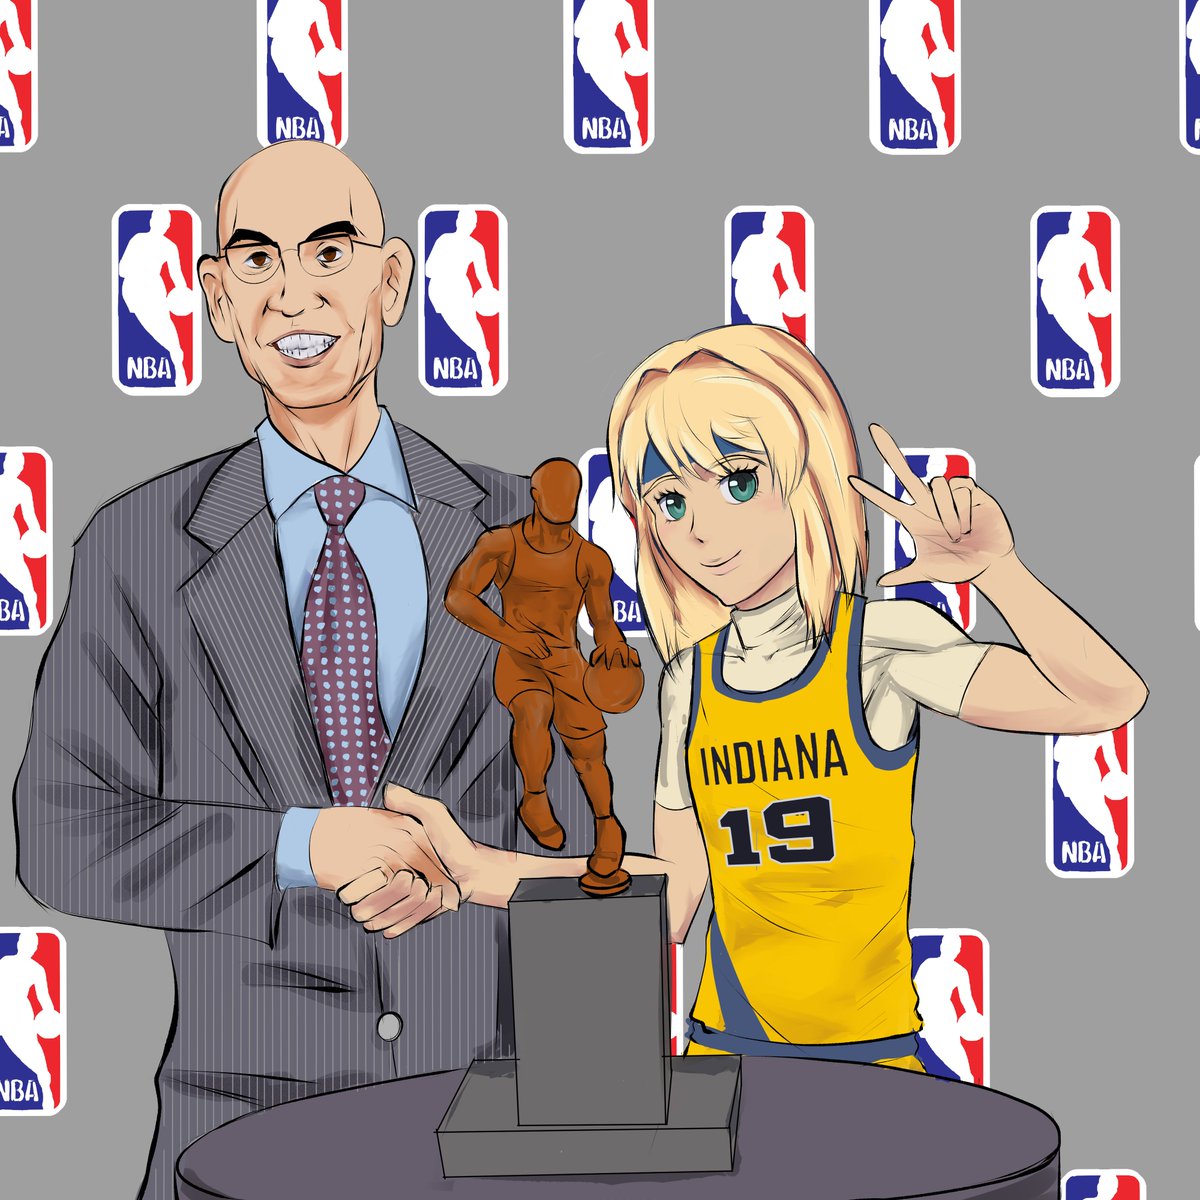 I wanted to redo this one. 

Bridget Guilty Gear accepting her MVP from Adam Silver, still somehow alive in 2180.

#GoldBlooded #KIAMVP #NBATwitter📷